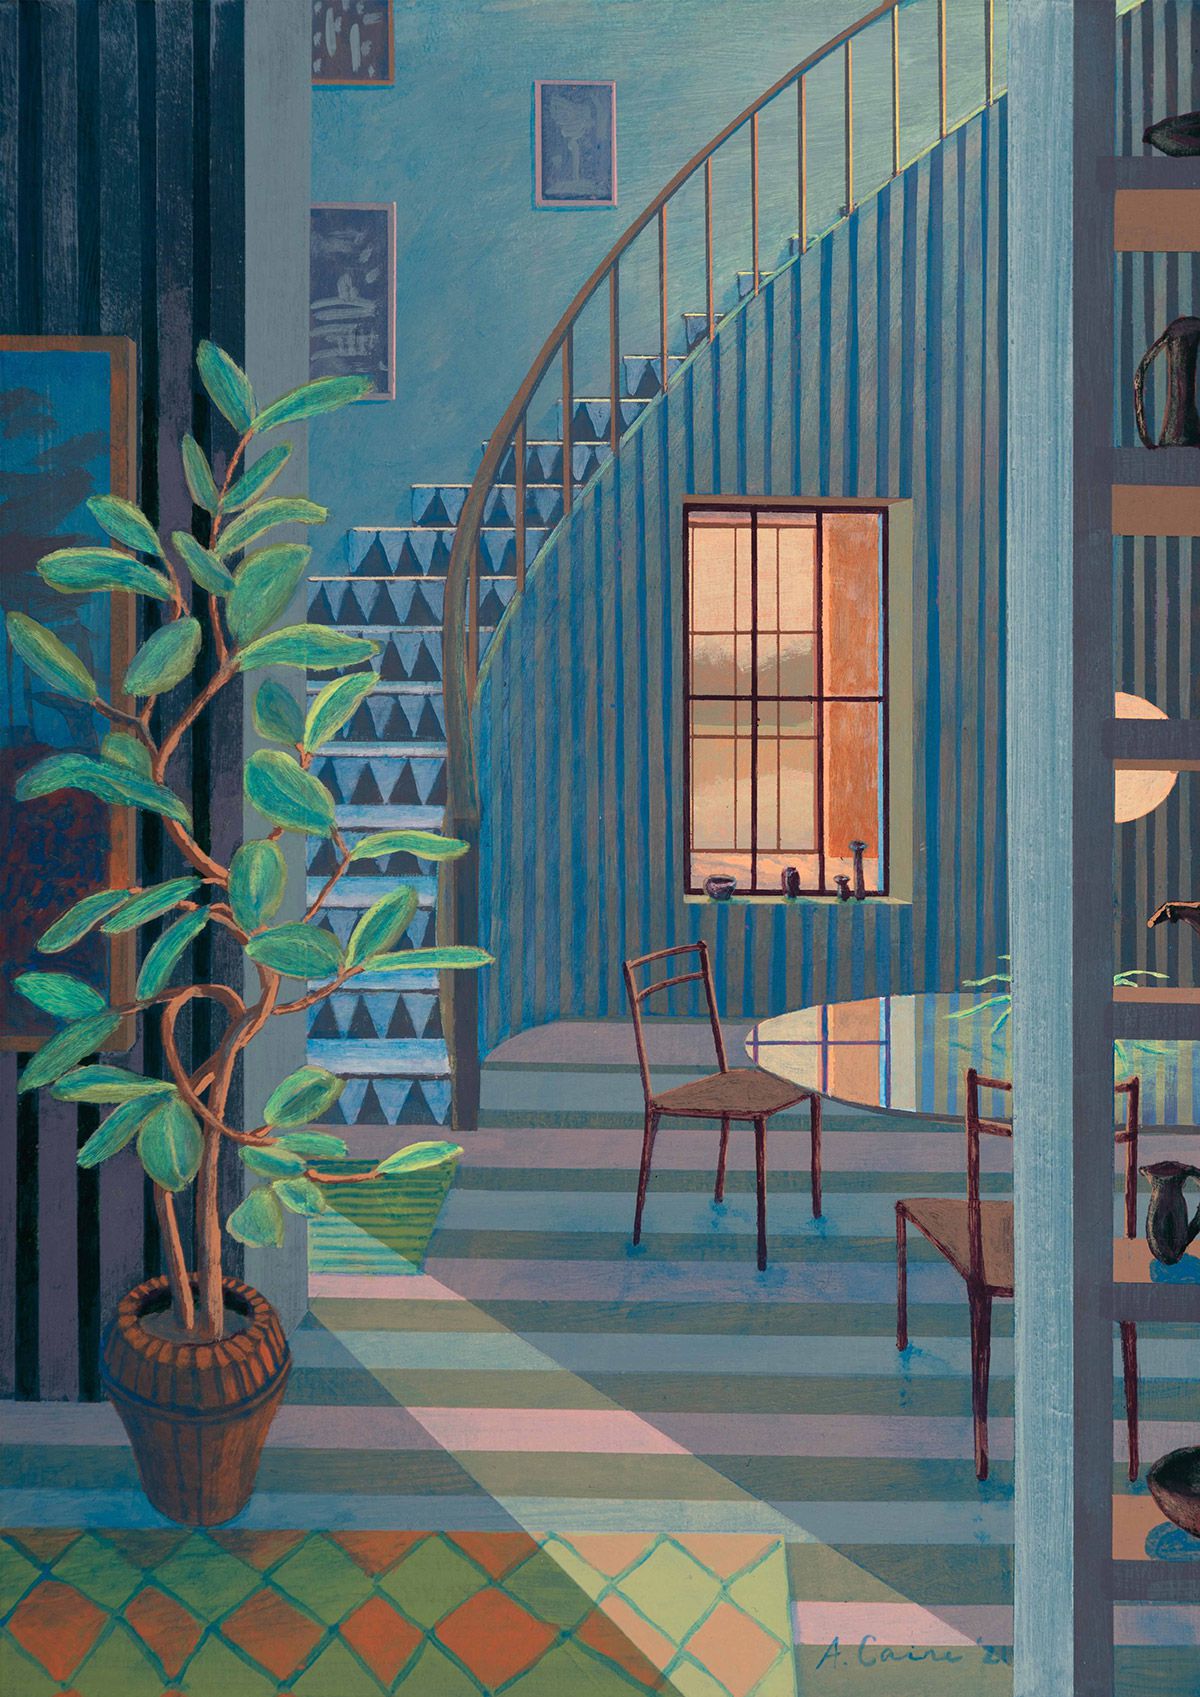 The Fantastical And Colorful Everyday Environments Of Alfie Caine 7